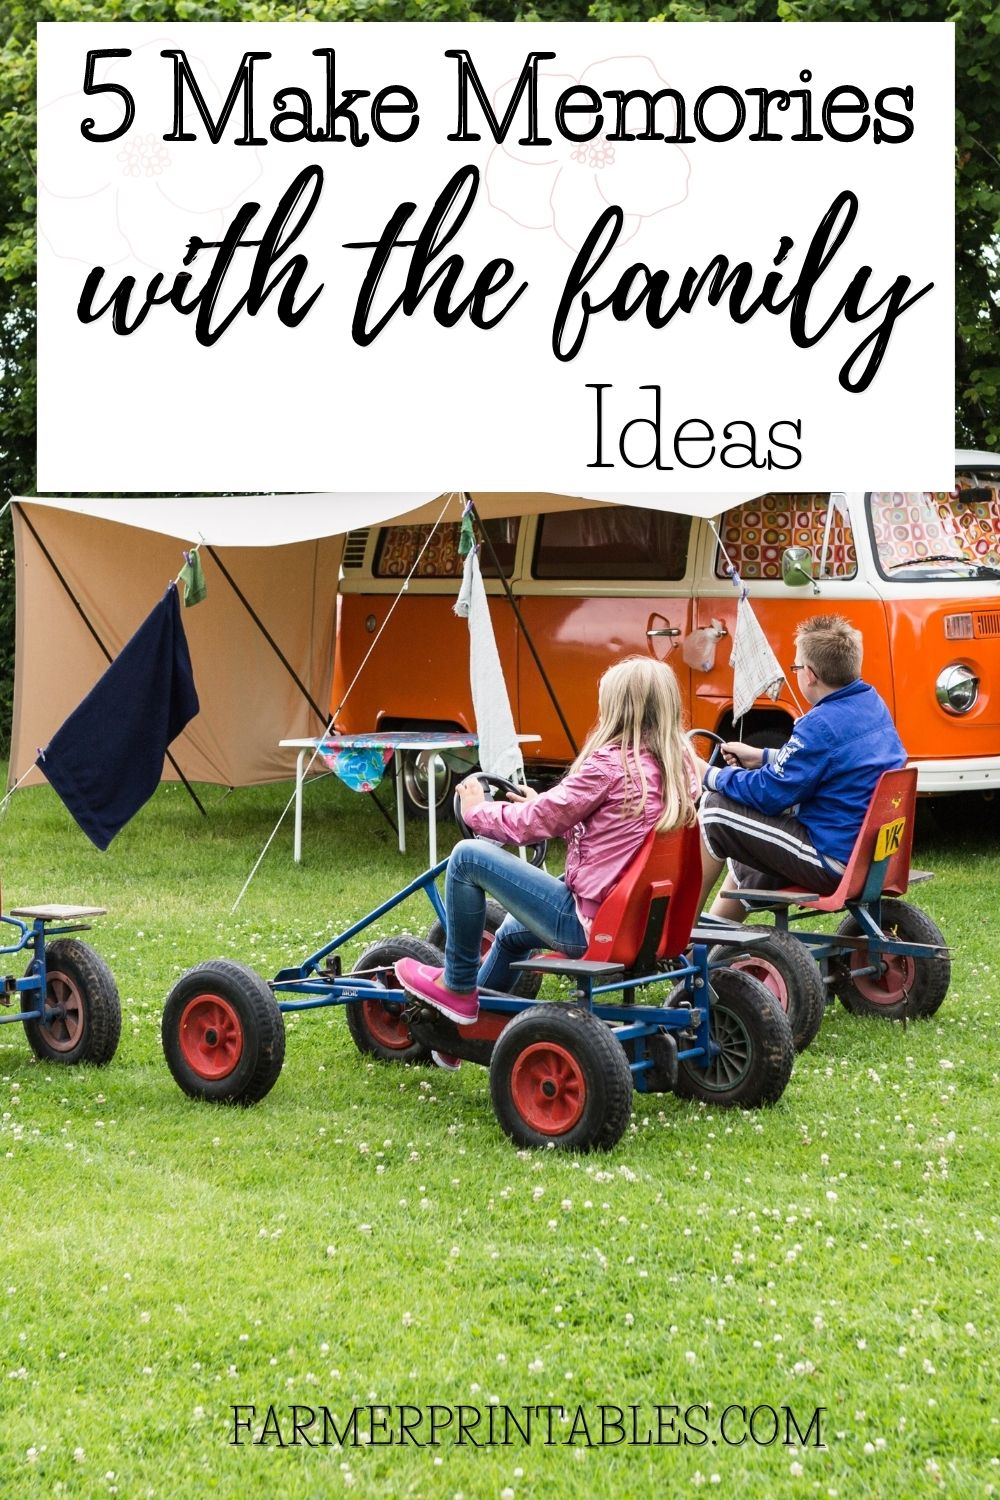 5 Make Memories With Family Ideas